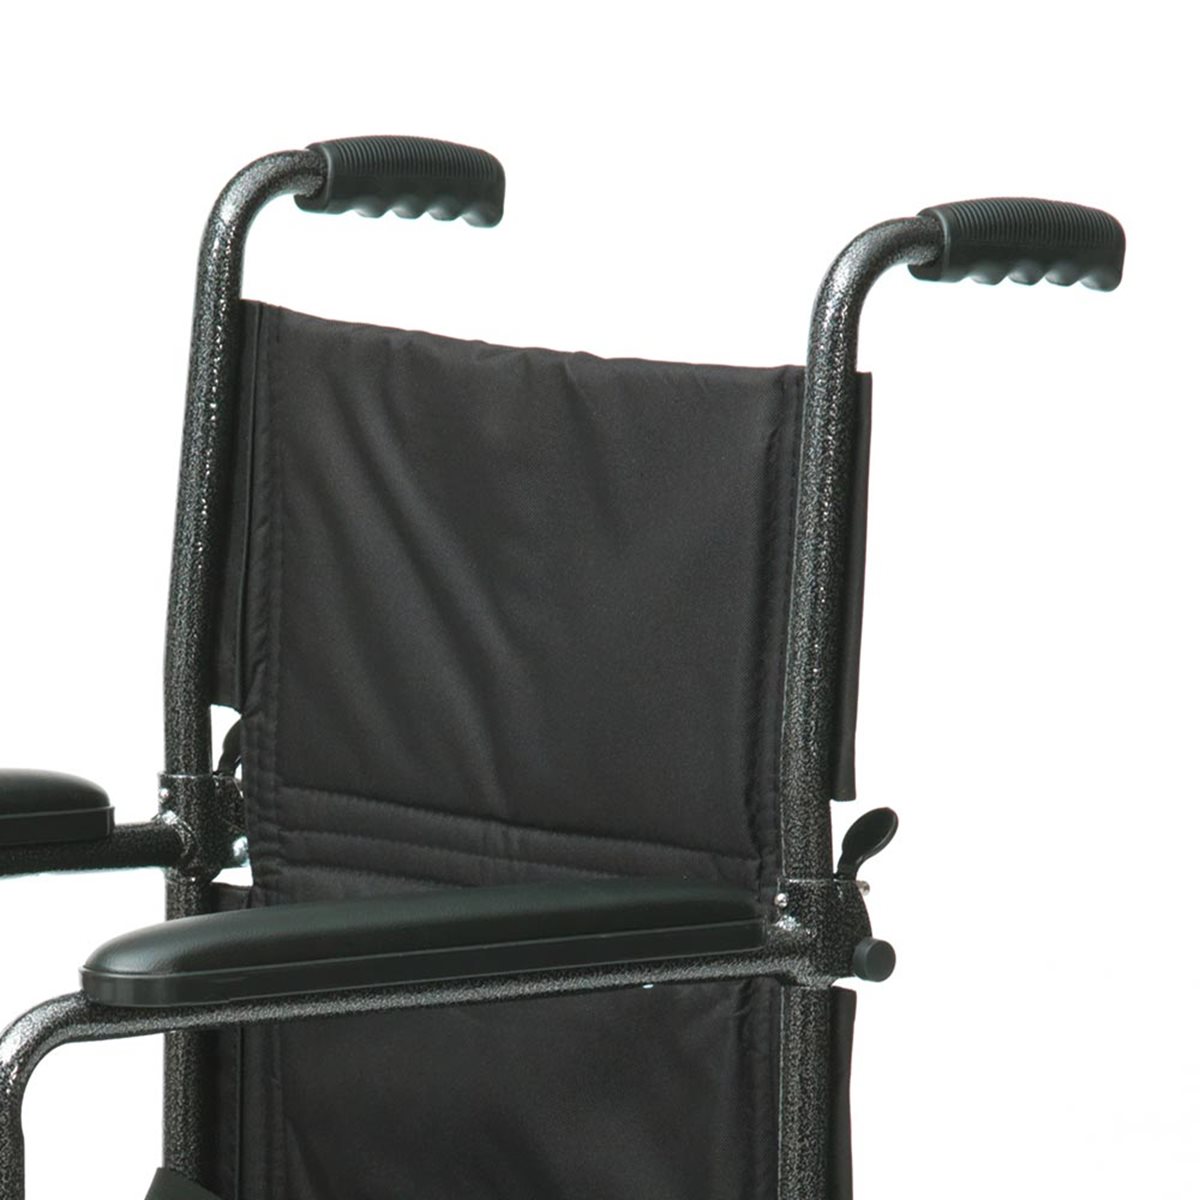 Travel Chair Value